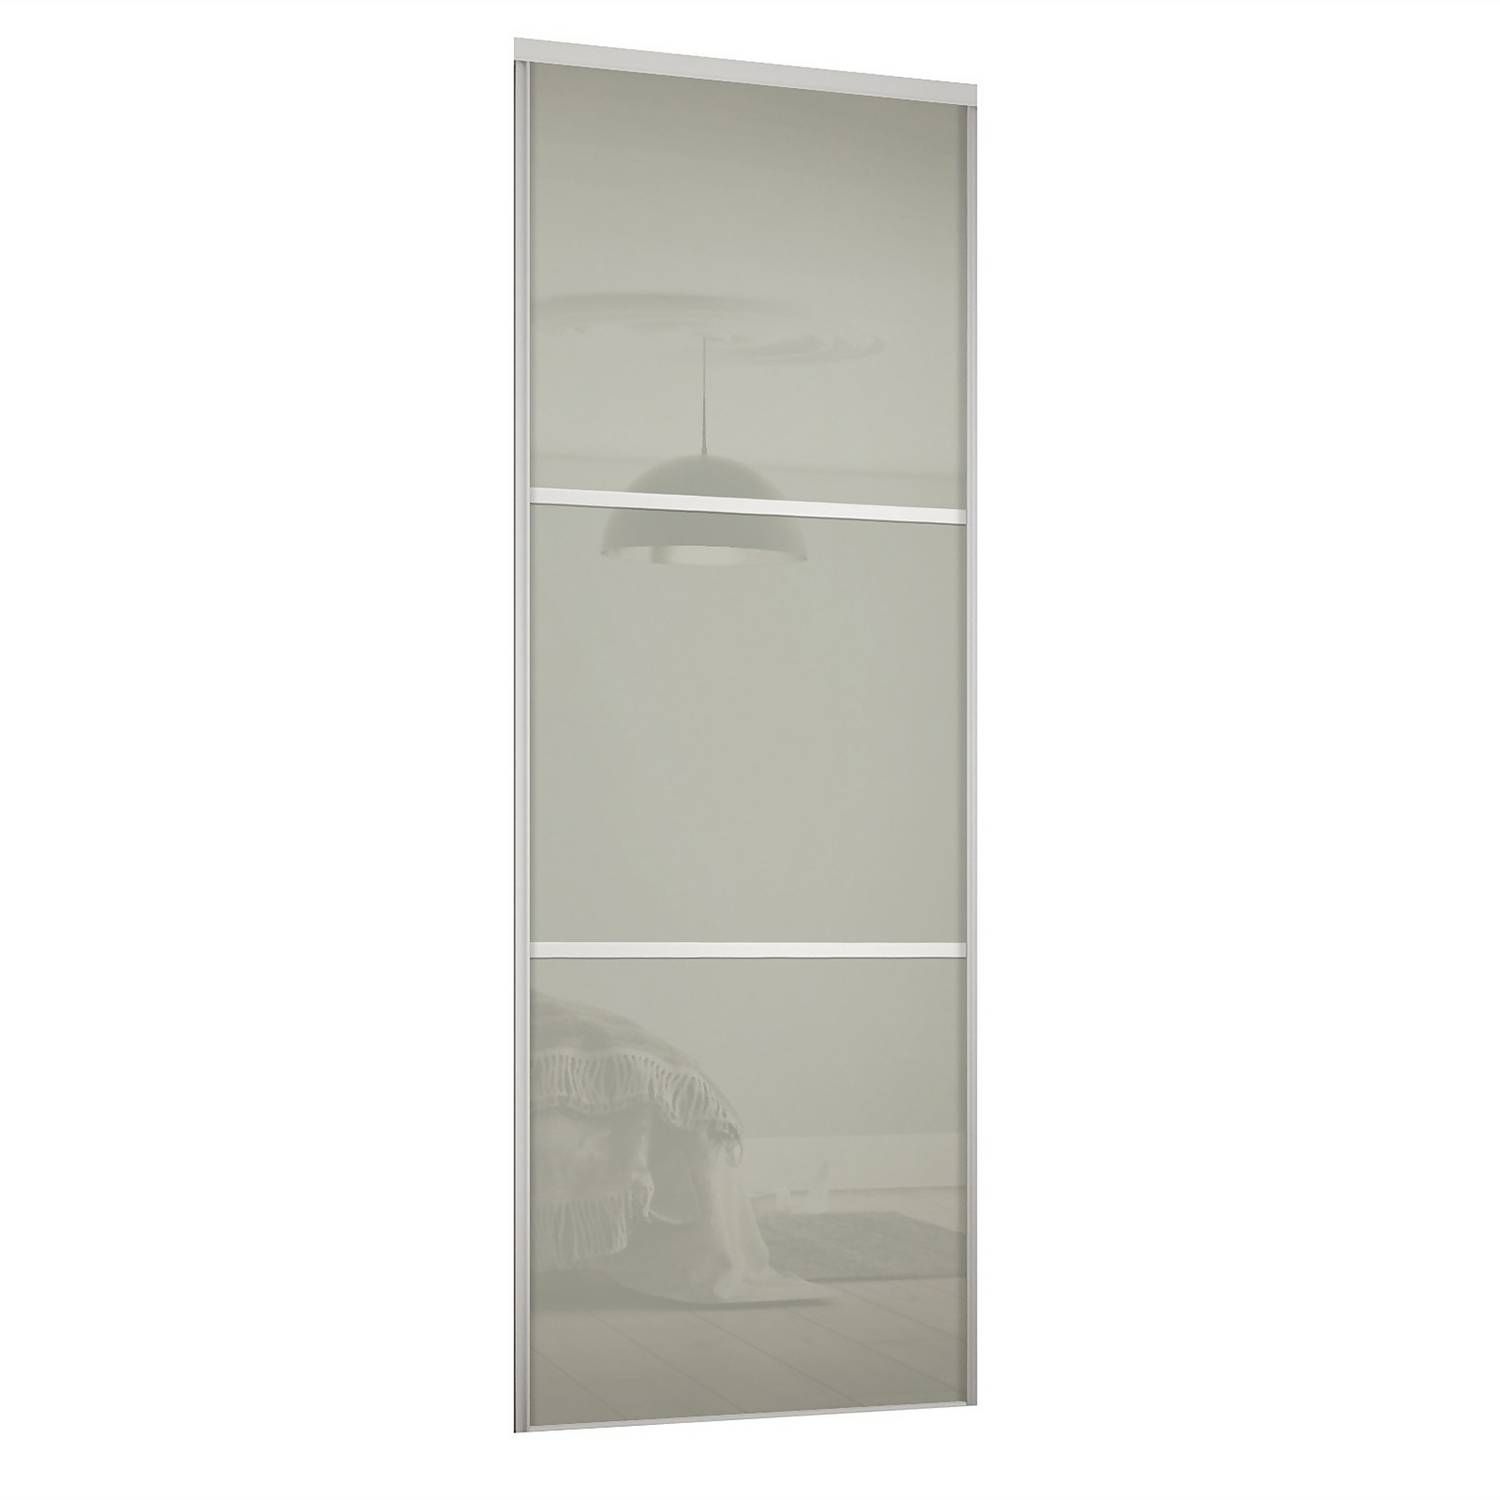 Linear Sliding Wardrobe Door 3 Panel Arctic White Glass With White Frame  (w)610mm | Homebase Inside Arctic White Wardrobes (View 14 of 15)